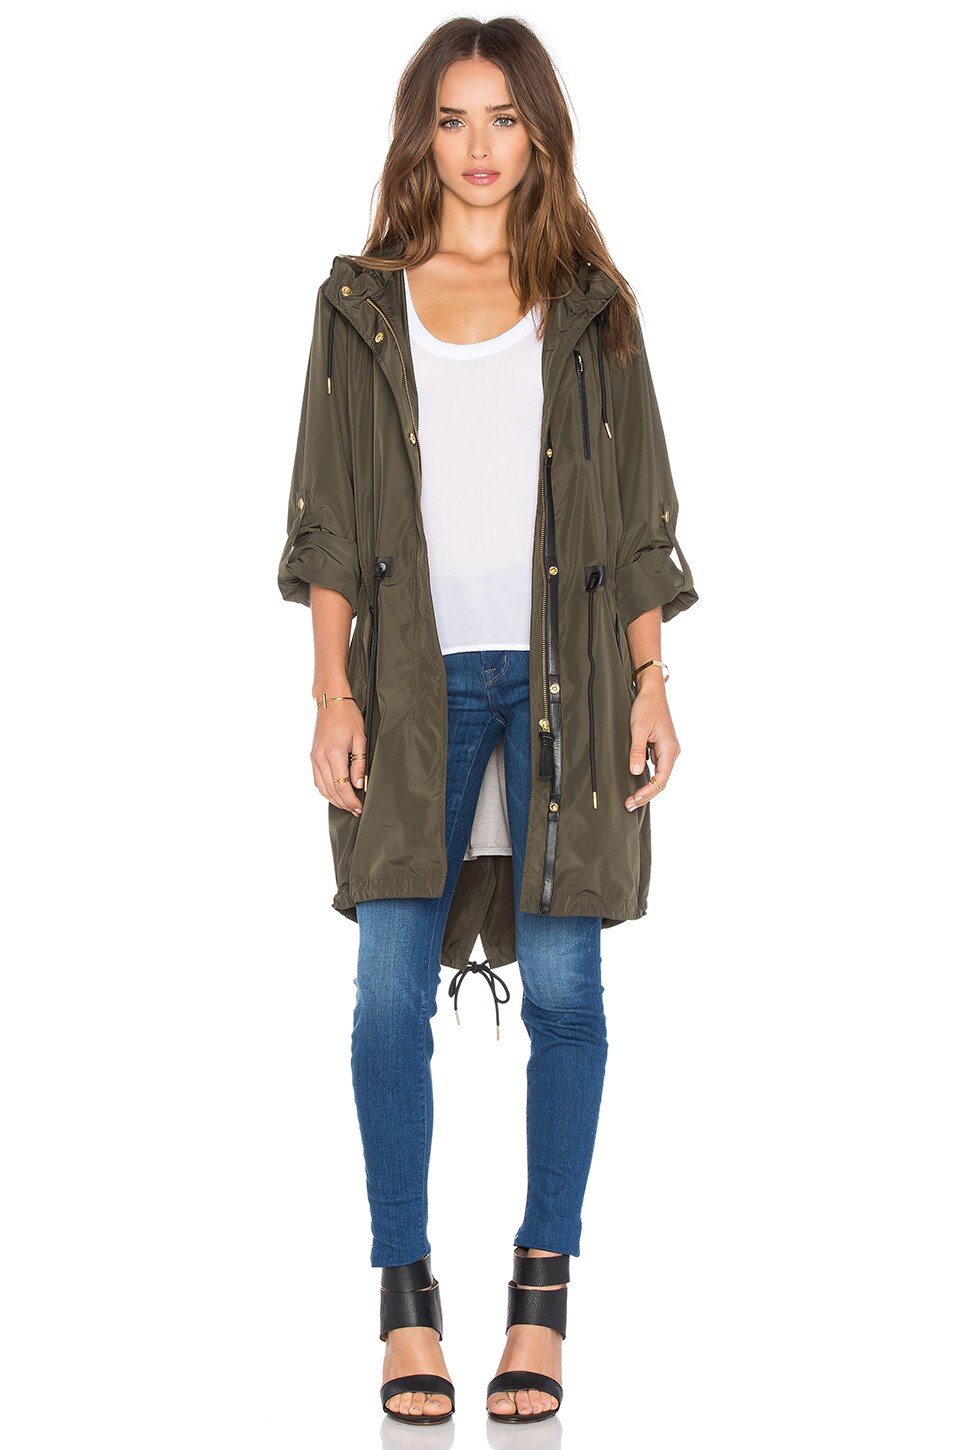 Mackage Norma Coat in Army | REVOLVE